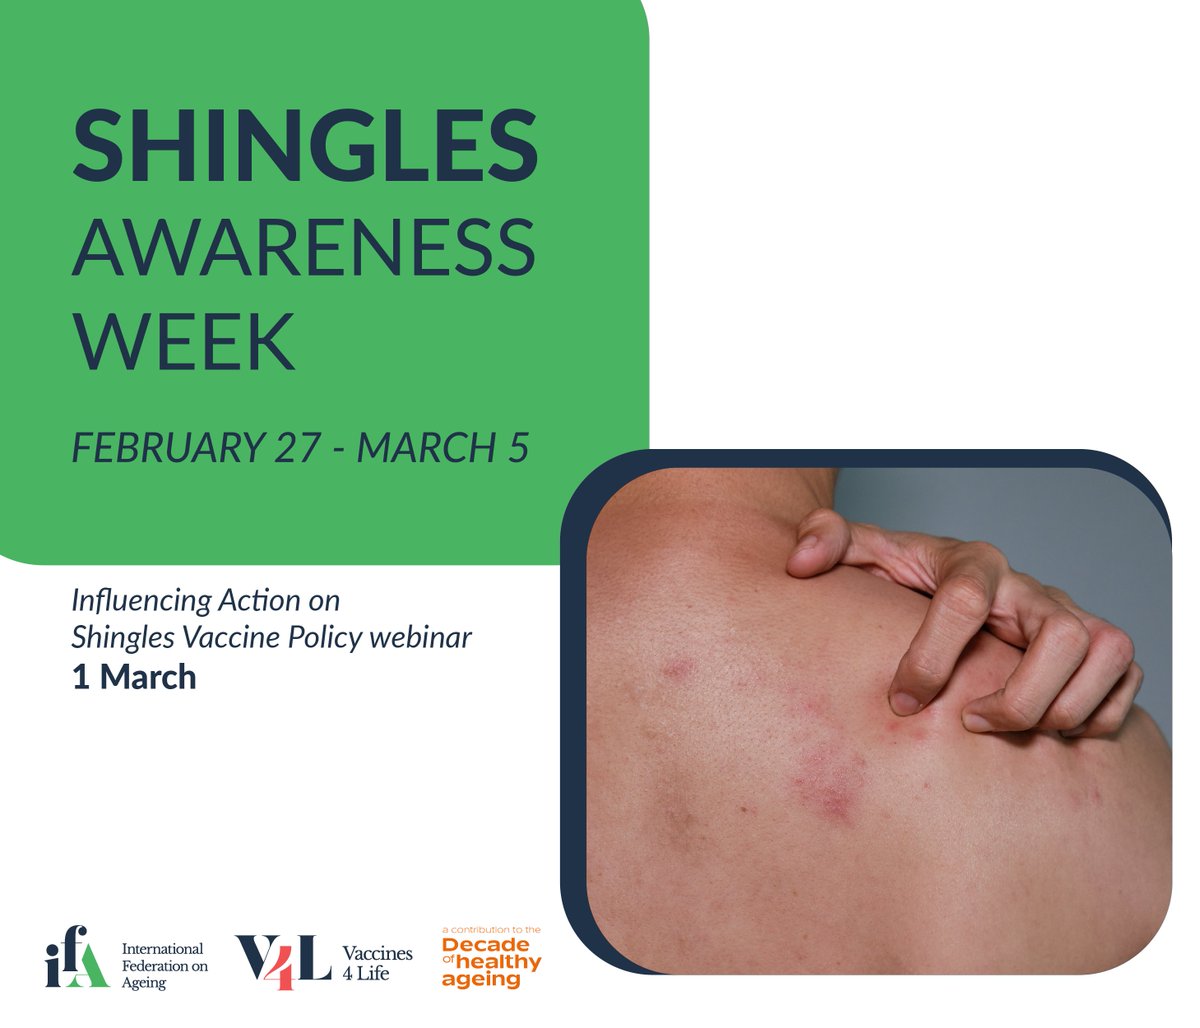 As part of #ShinglesAwarenessWeek, we'll be joining @IFAgeing @vaccines4life tomorrow for their webinar looking at the status of shingles in the EU 🇪🇺

Register here 👇

us06web.zoom.us/webinar/regist…